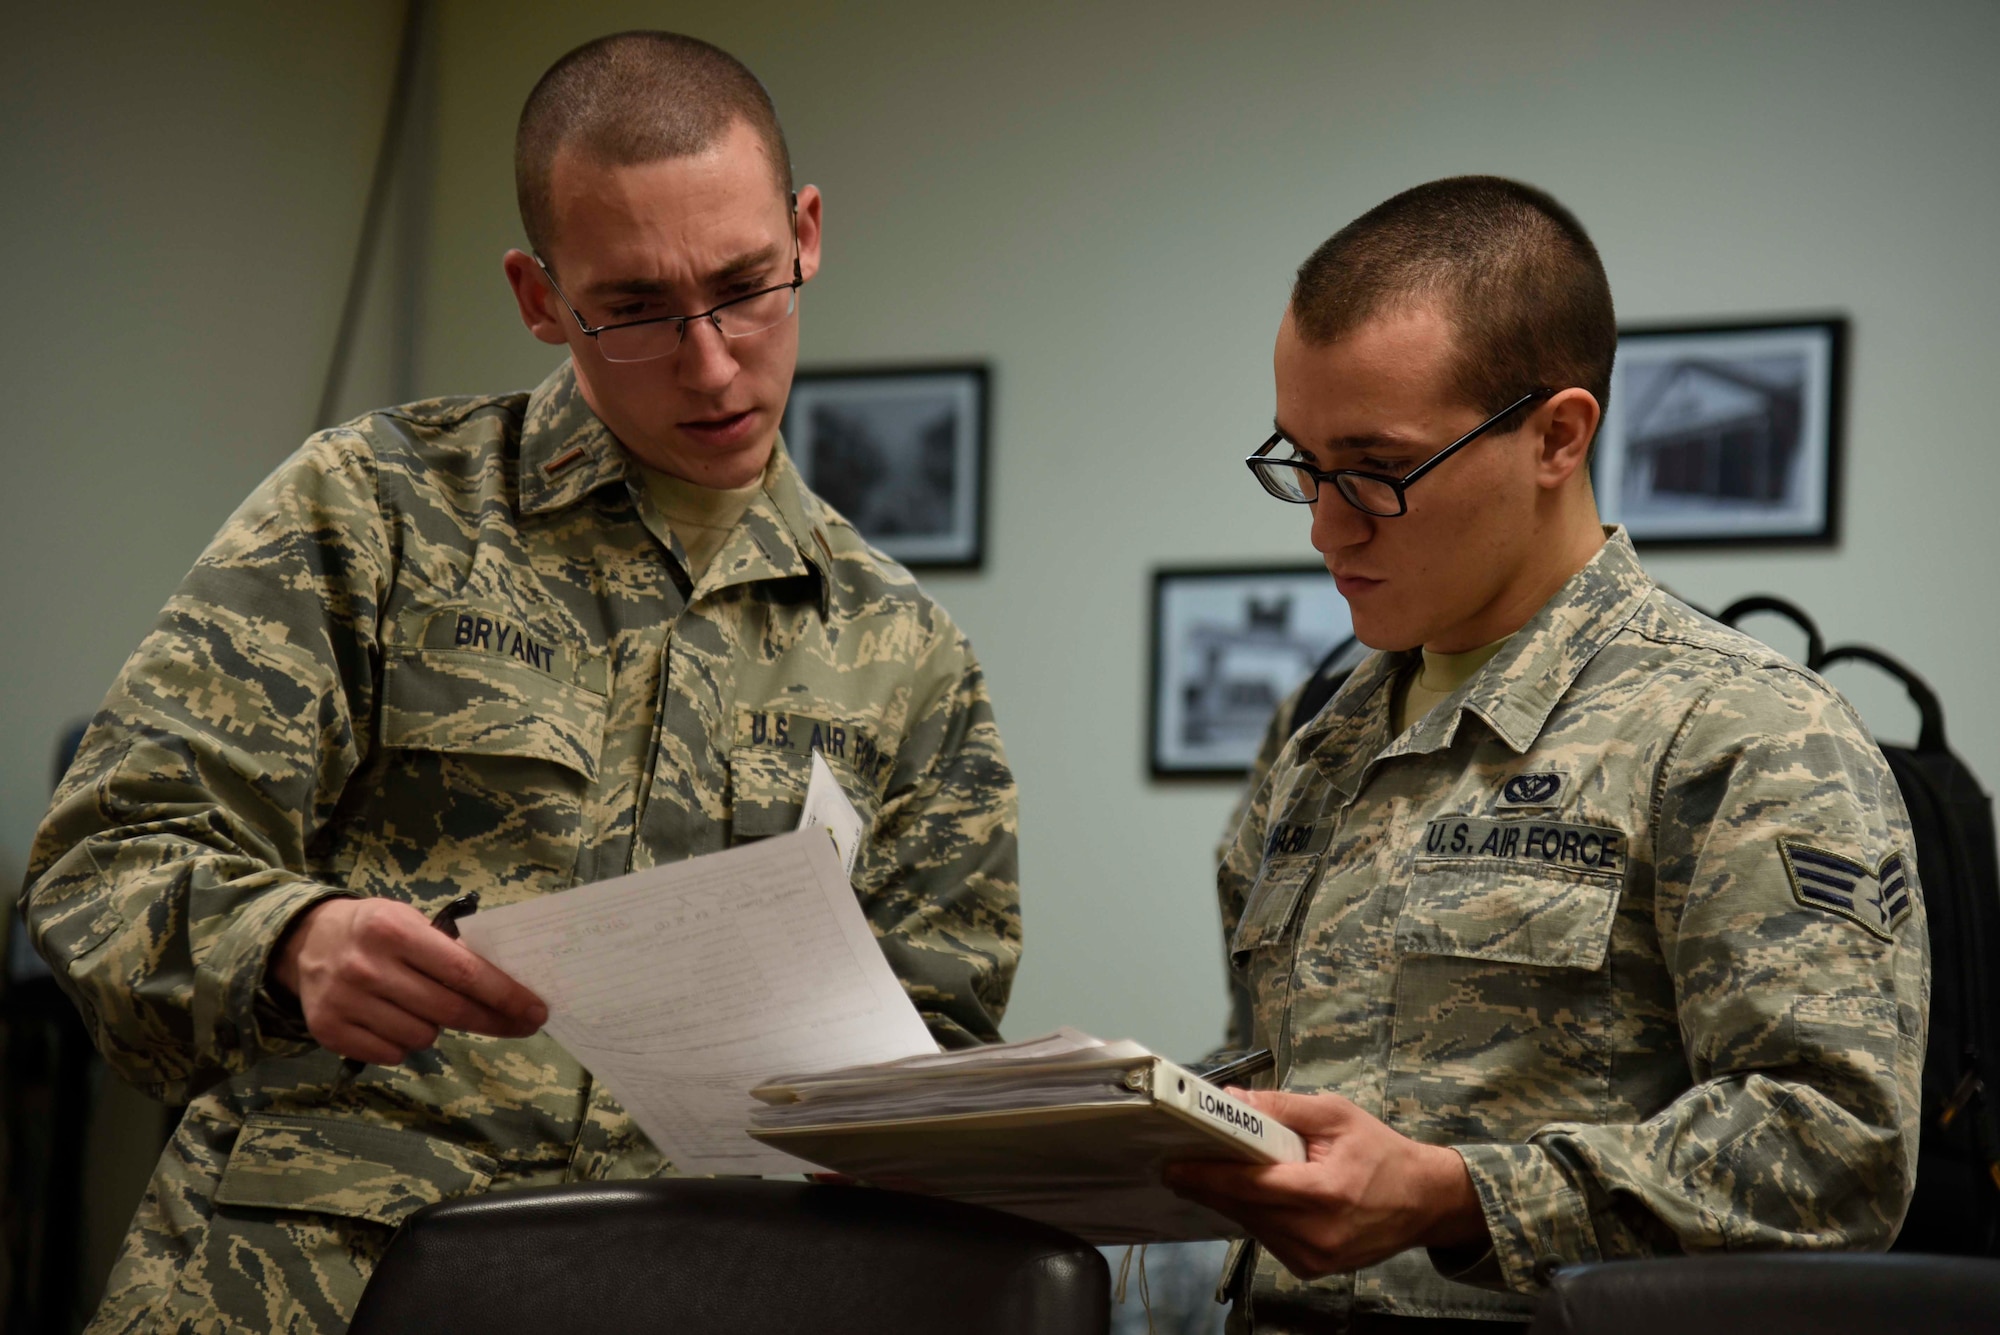 U.S. Air Force Senior Airman Vincent Lombardi, 35th Civil Engineer Squadron electrical systems journeyman, has his personnel file reviewed during Phase I of exercise Beverly Sunrise 16-01 at Misawa Air Base, Japan, Nov. 1, 2015. Lombardi, along with other Airmen, went through the personnel deployment function line where records containing immunizations, existing medical conditions and even their will are reviewed before deploying to their next destination. (U.S. Air Force photo by Airman 1st Class Jordyn Fetter/Released)